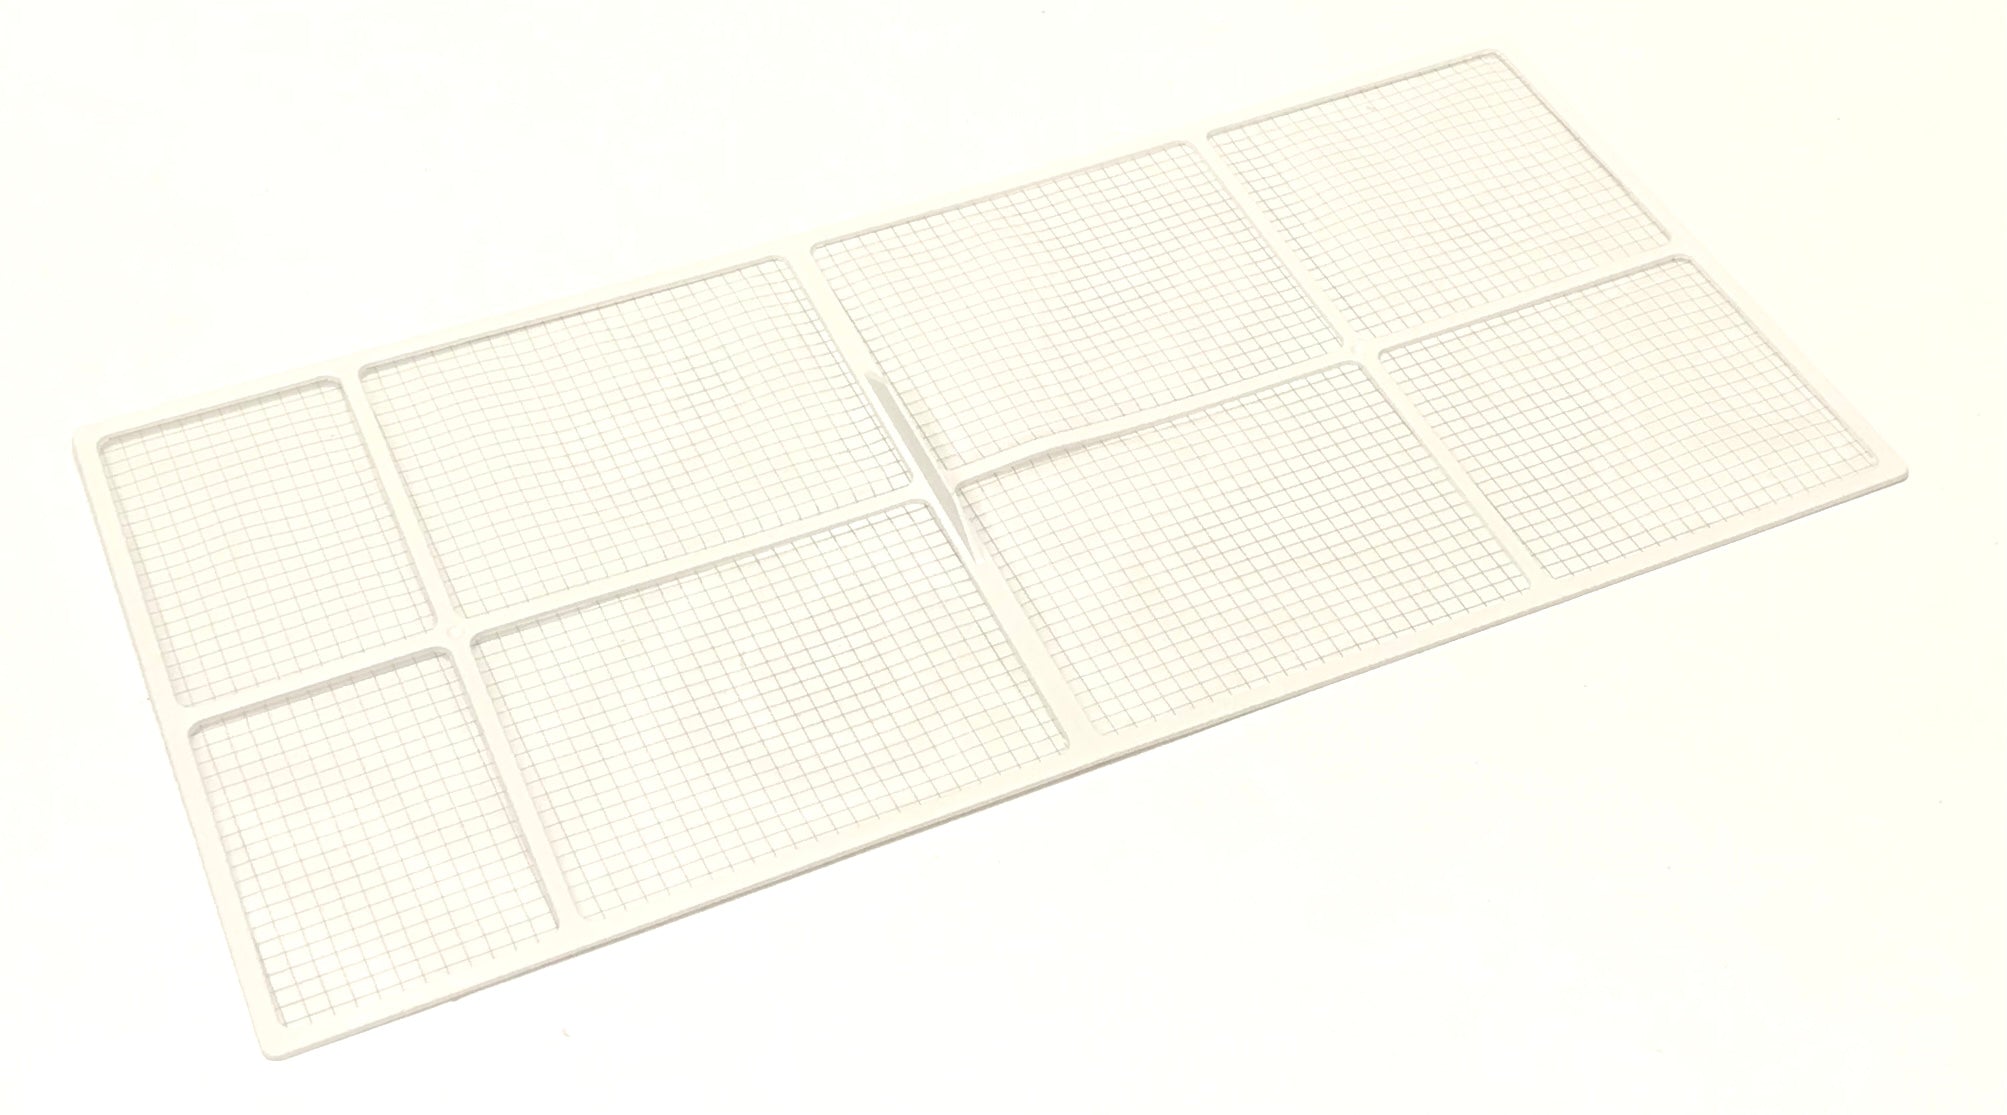 OEM LG Air Conditioner Filter Originally Shipped With LW1817IVSM, LW2217IVSM